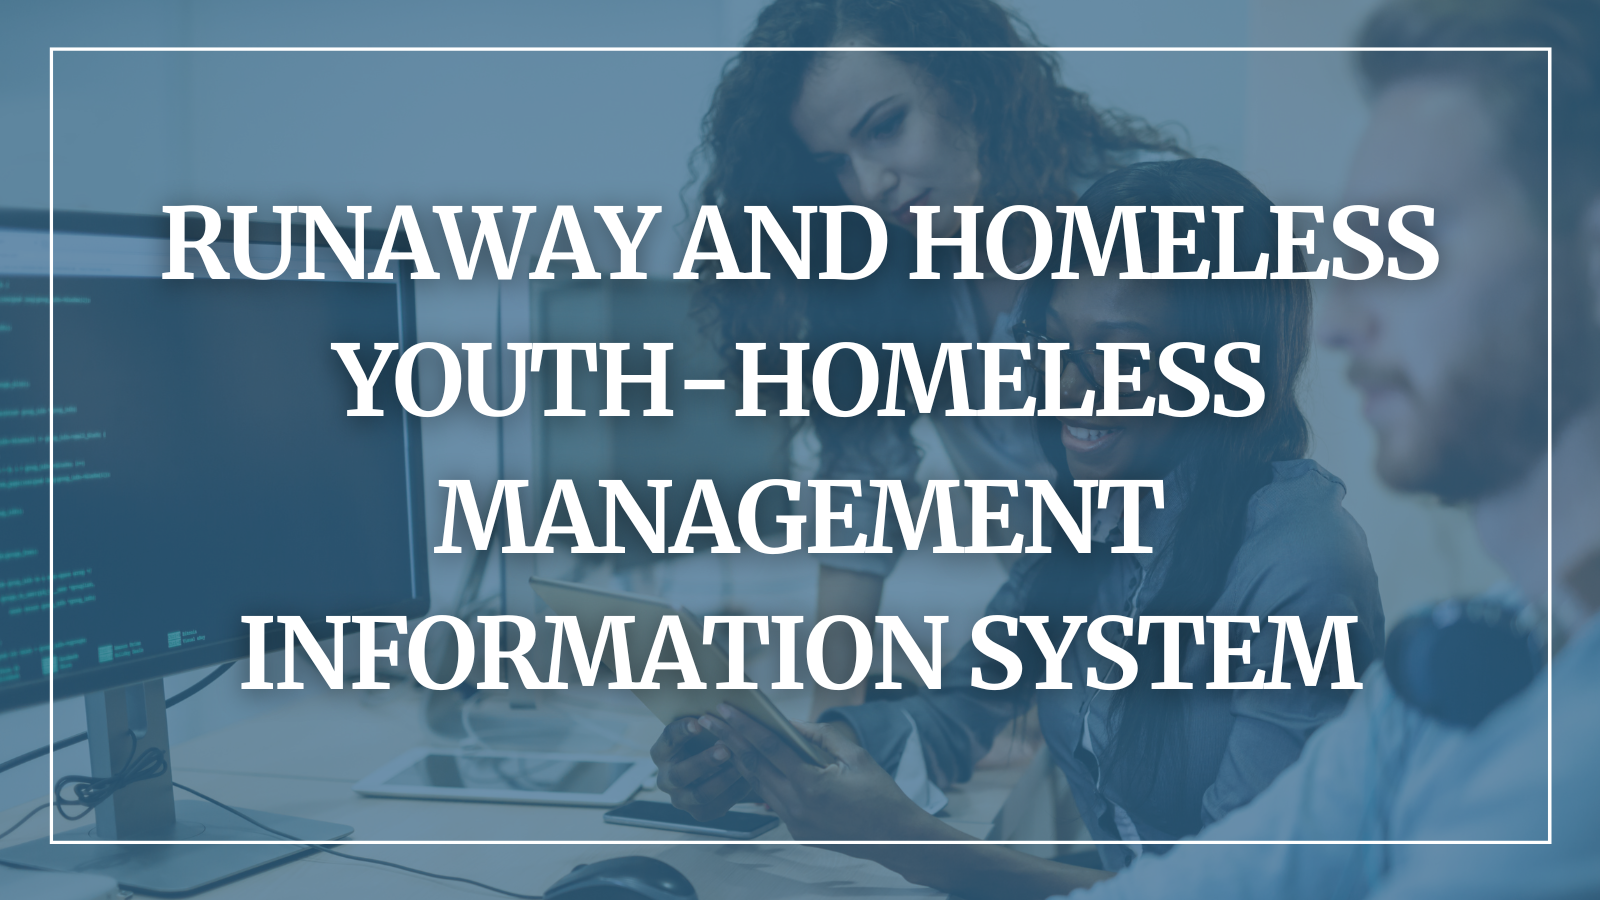 Runaway and Homeless Youth - Homeless Management Information System